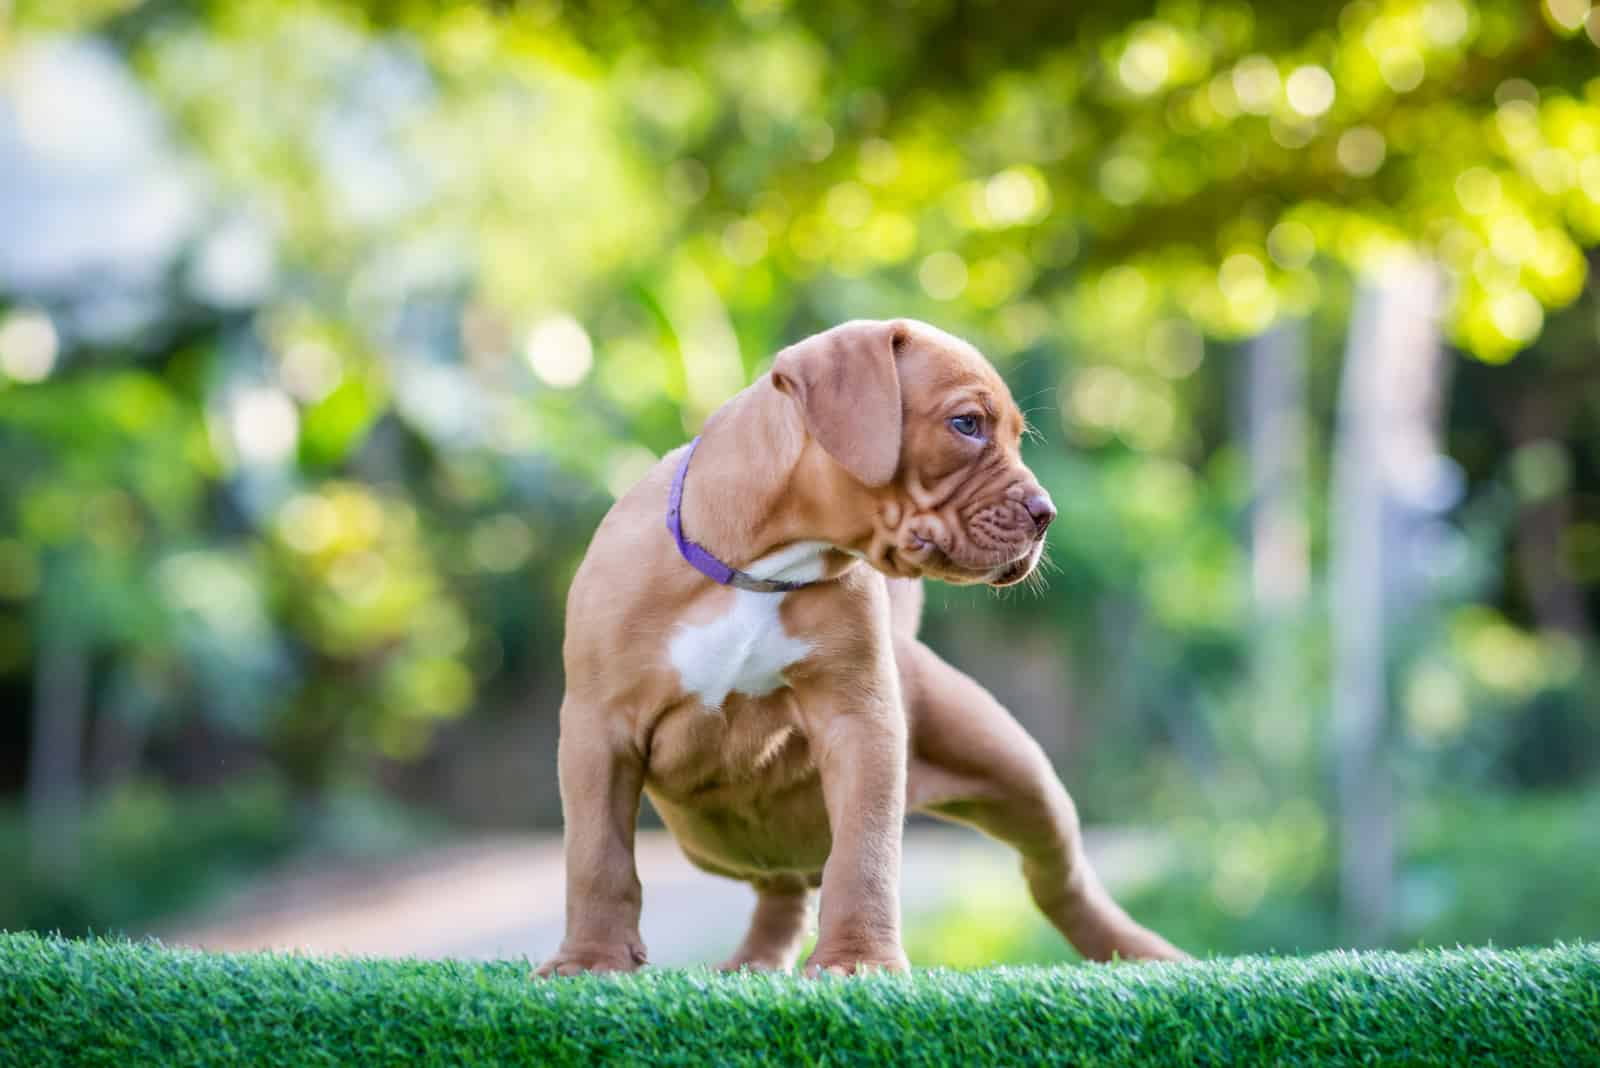 Should You Buy Pitbulls From Pet Shops? 12 Things To Consider